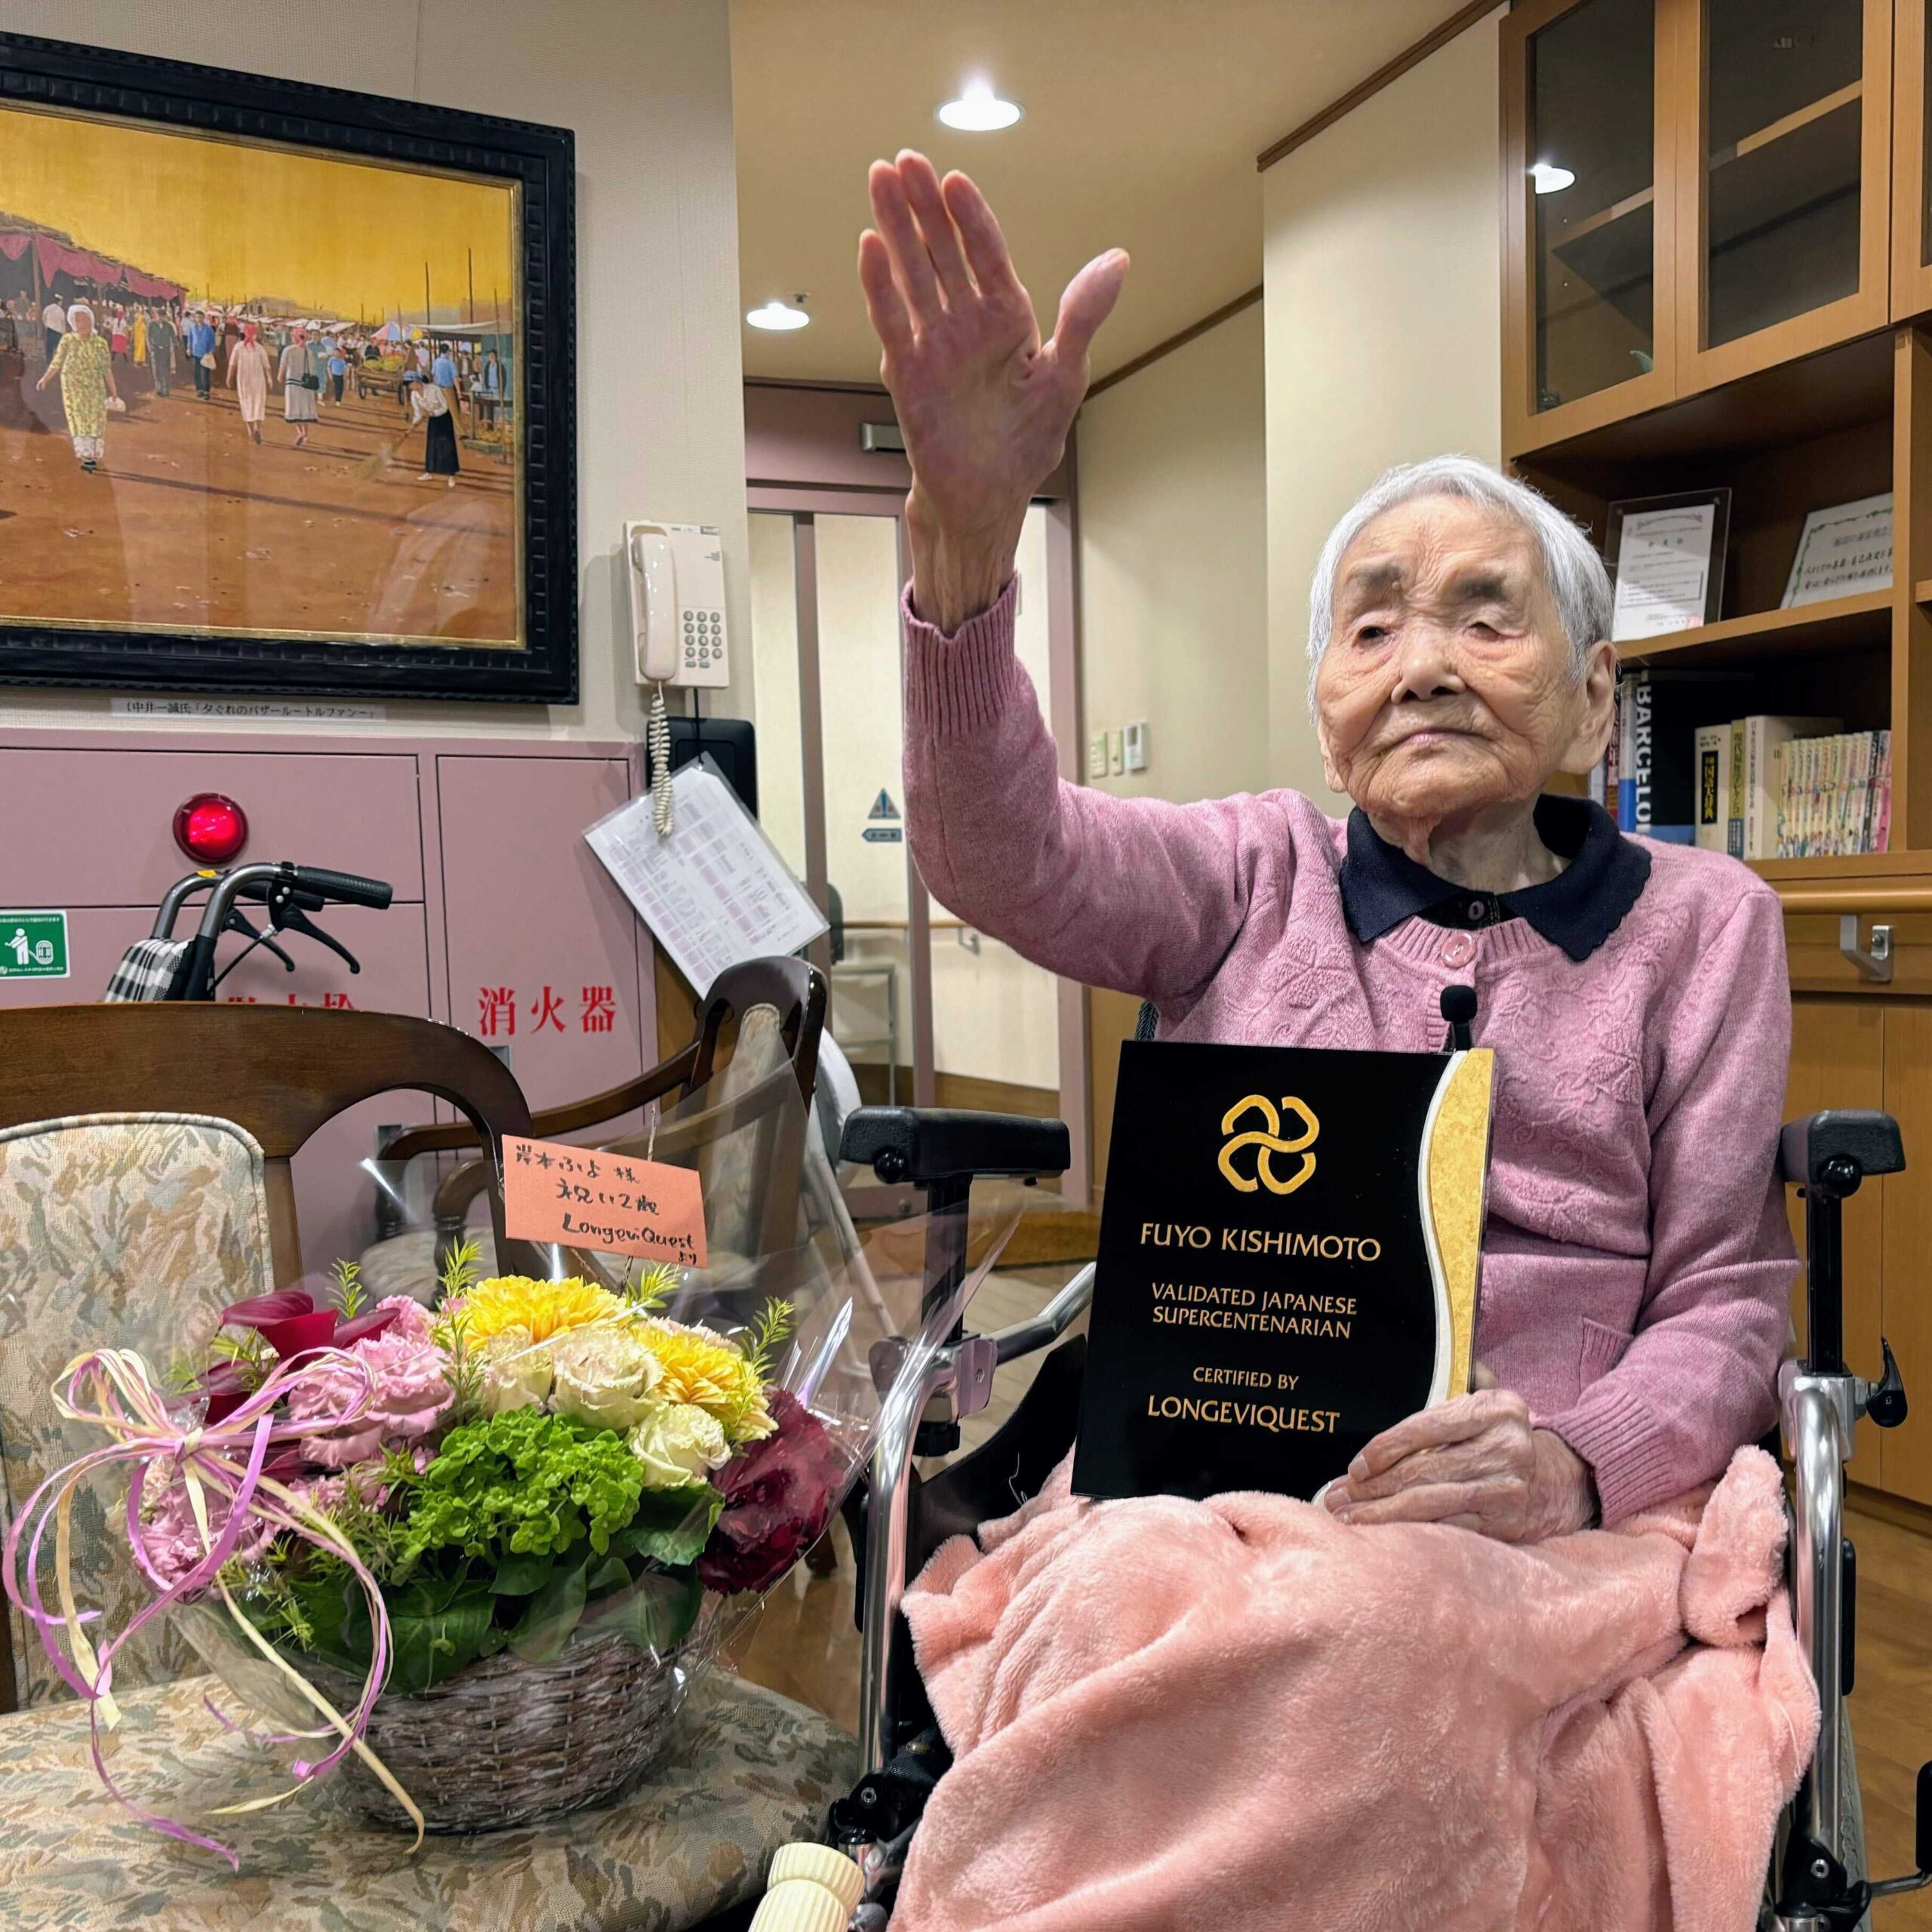 Mrs. Kishimoto was presented with a flower basket and a plaque celebrating her status as a verified supercentenarian which she held up proudly for photos.